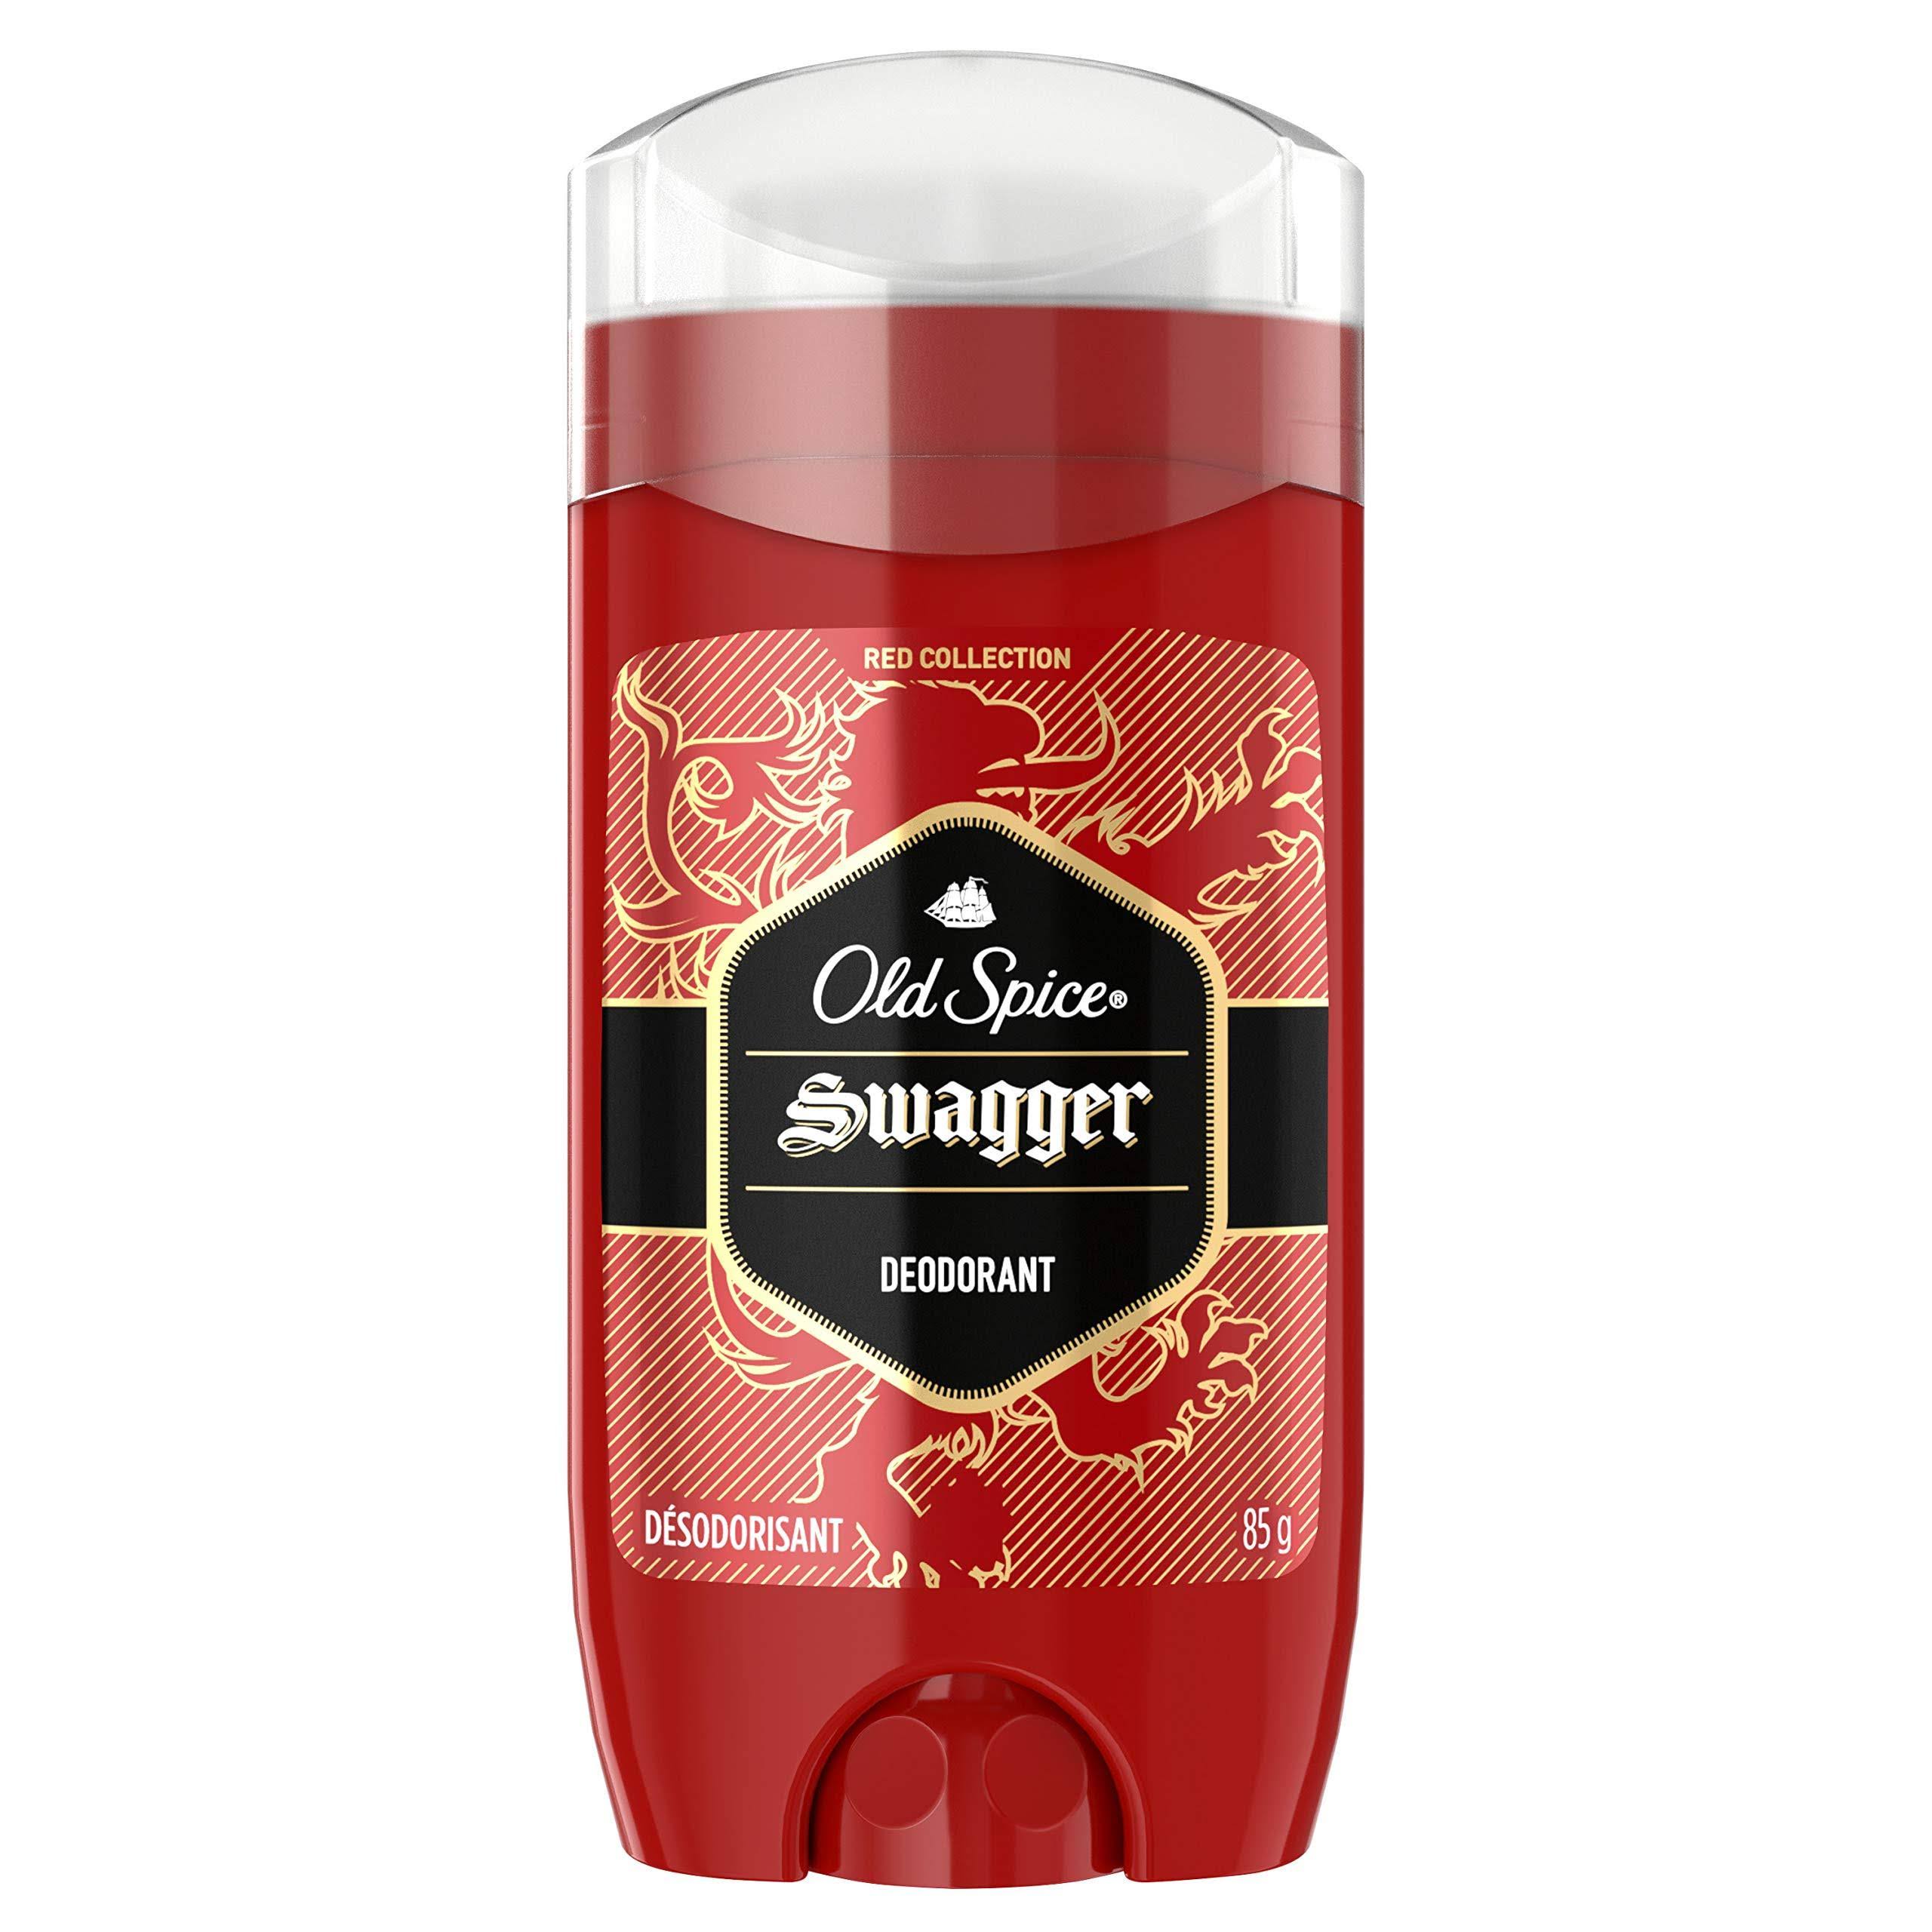 Old Spice Red Zone Swagger Deodorant - 85g